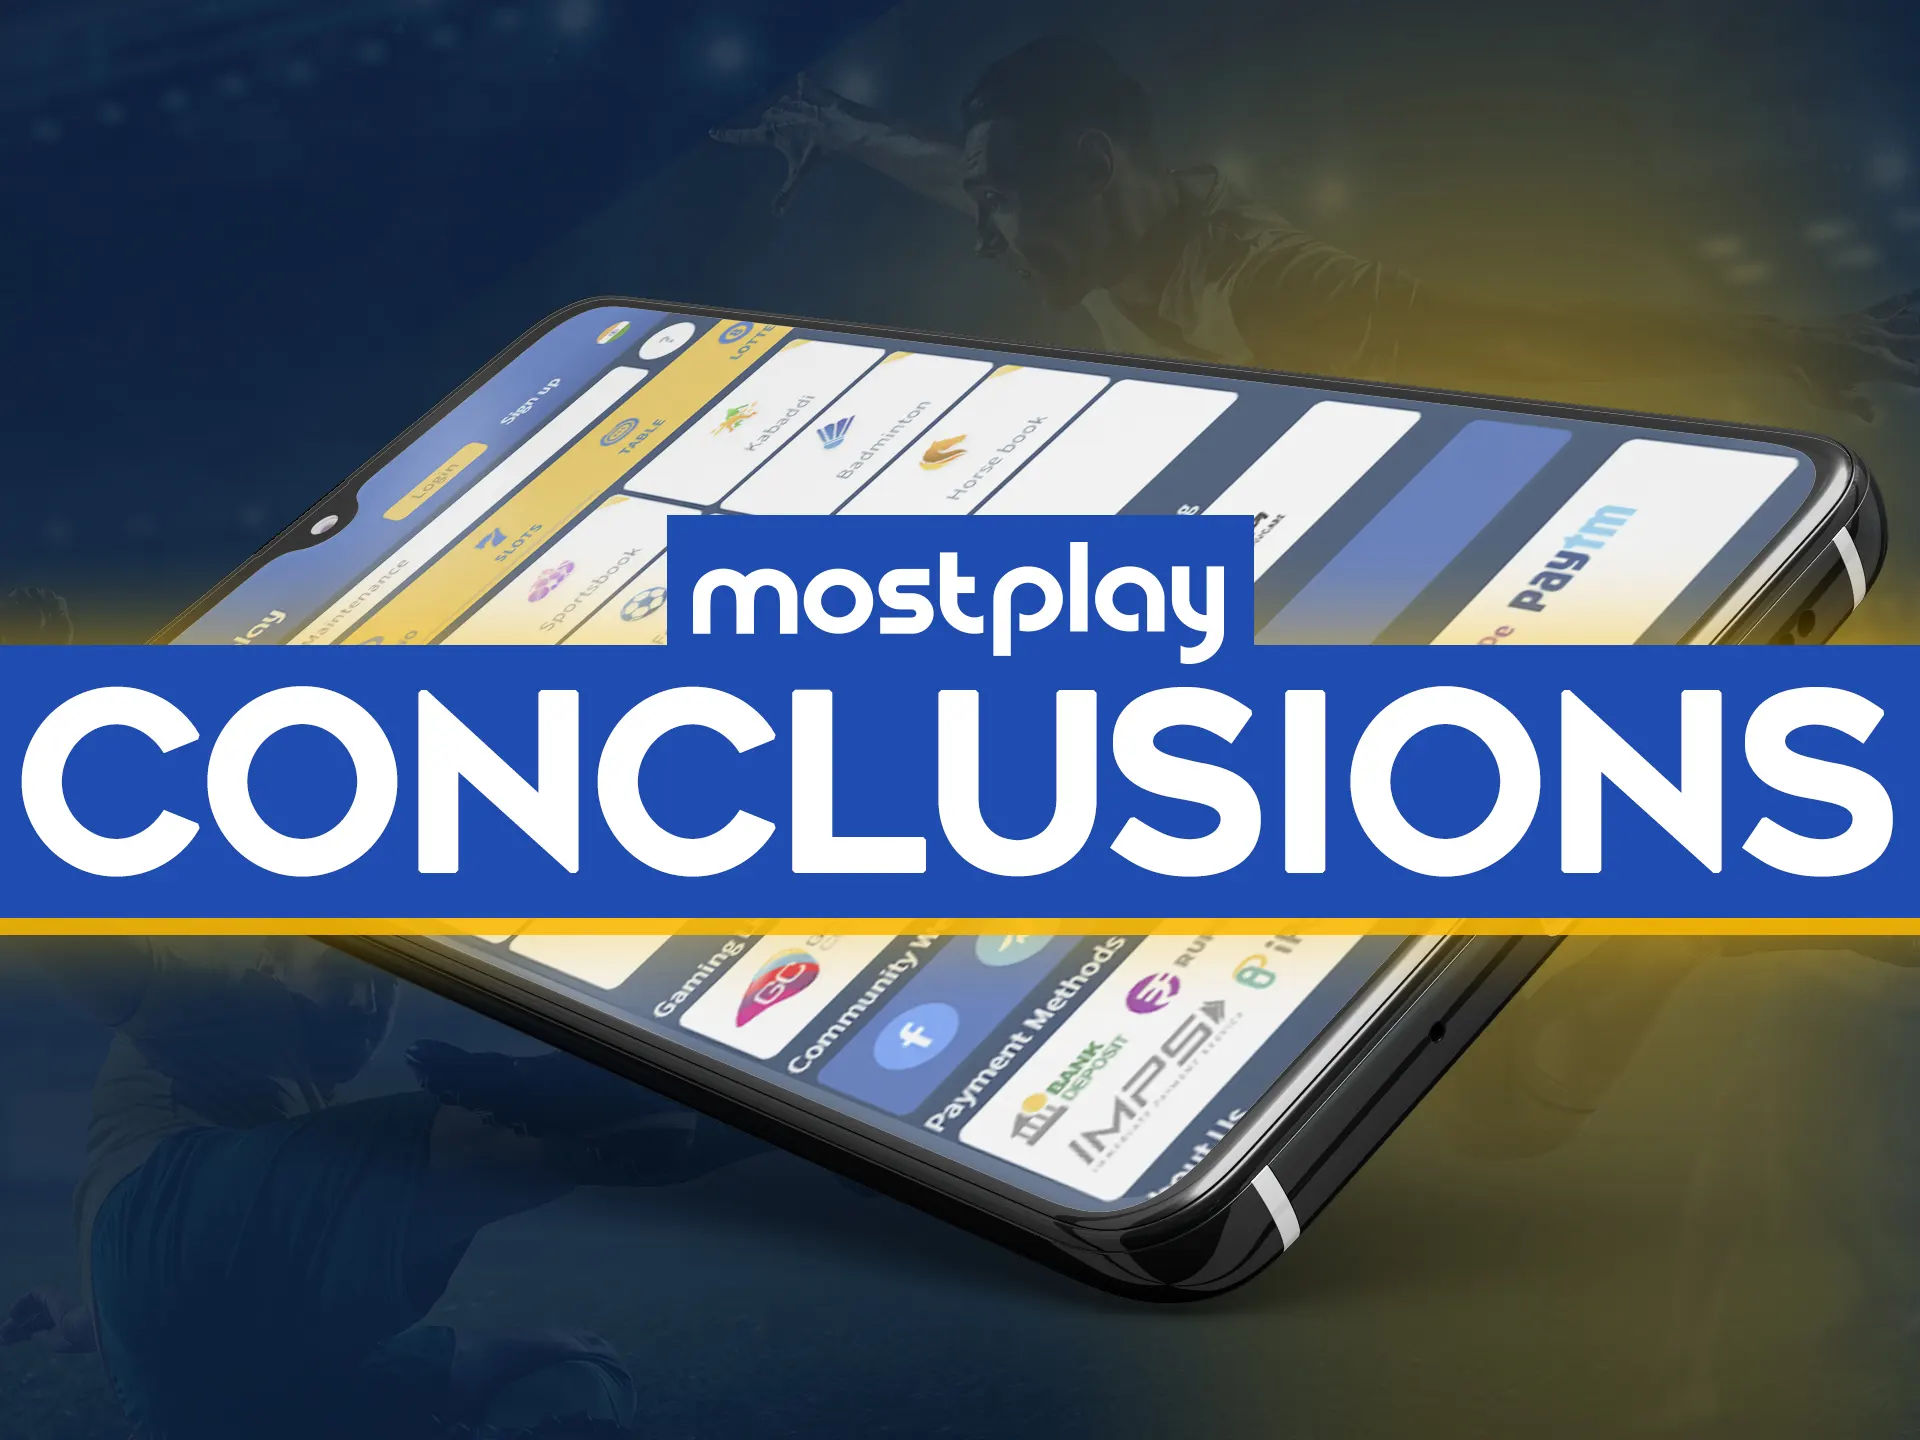 Install the Mostplay app for improving your betting skills.